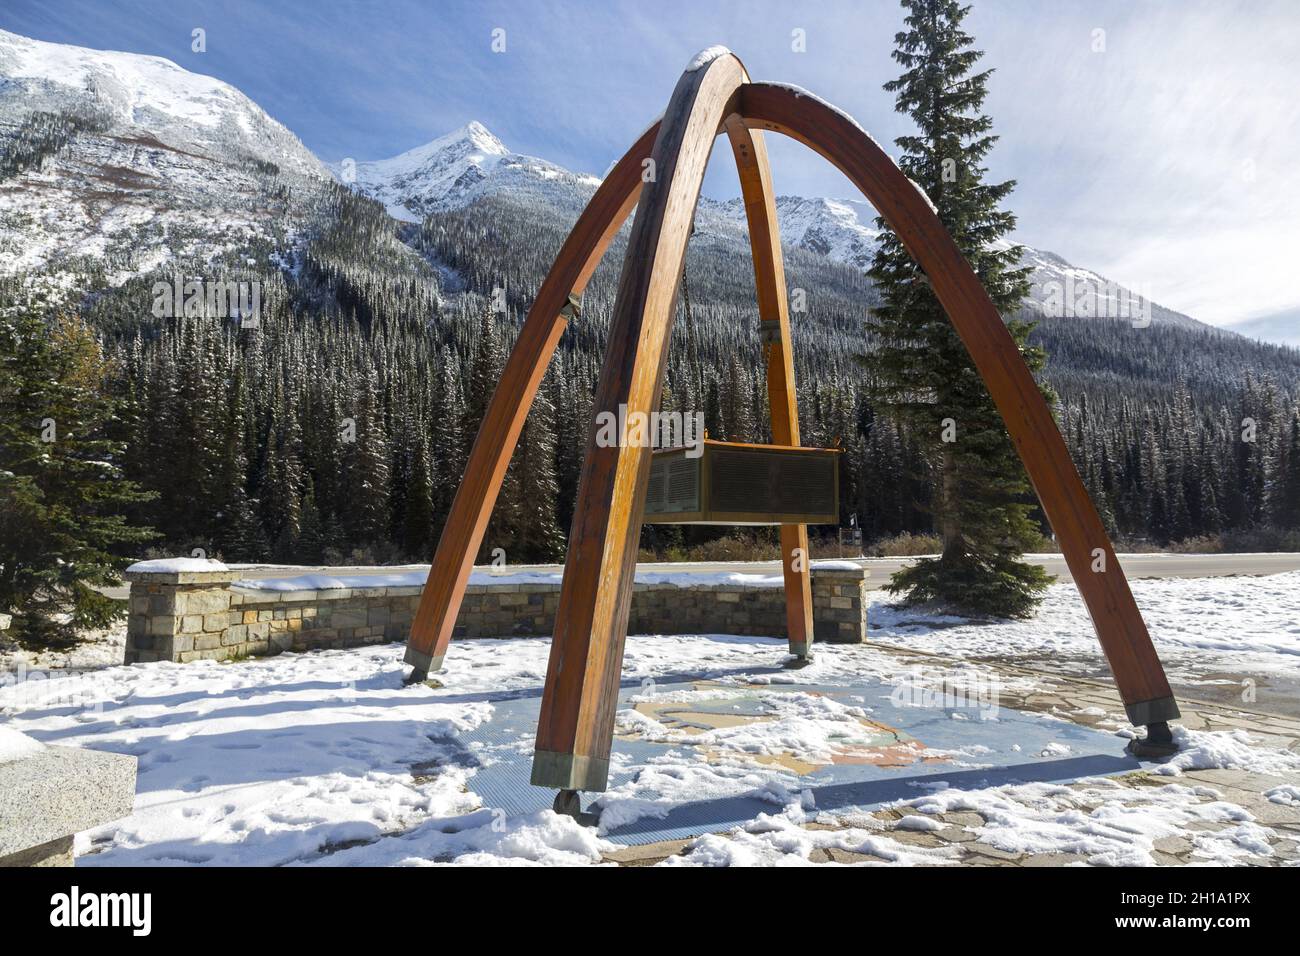 Rogers Pass Monument Arches by Trans-Canada Highway with Snowy British Columbia, Canada Selkirk Mountains Glacier National Park Landscape Stock Photo